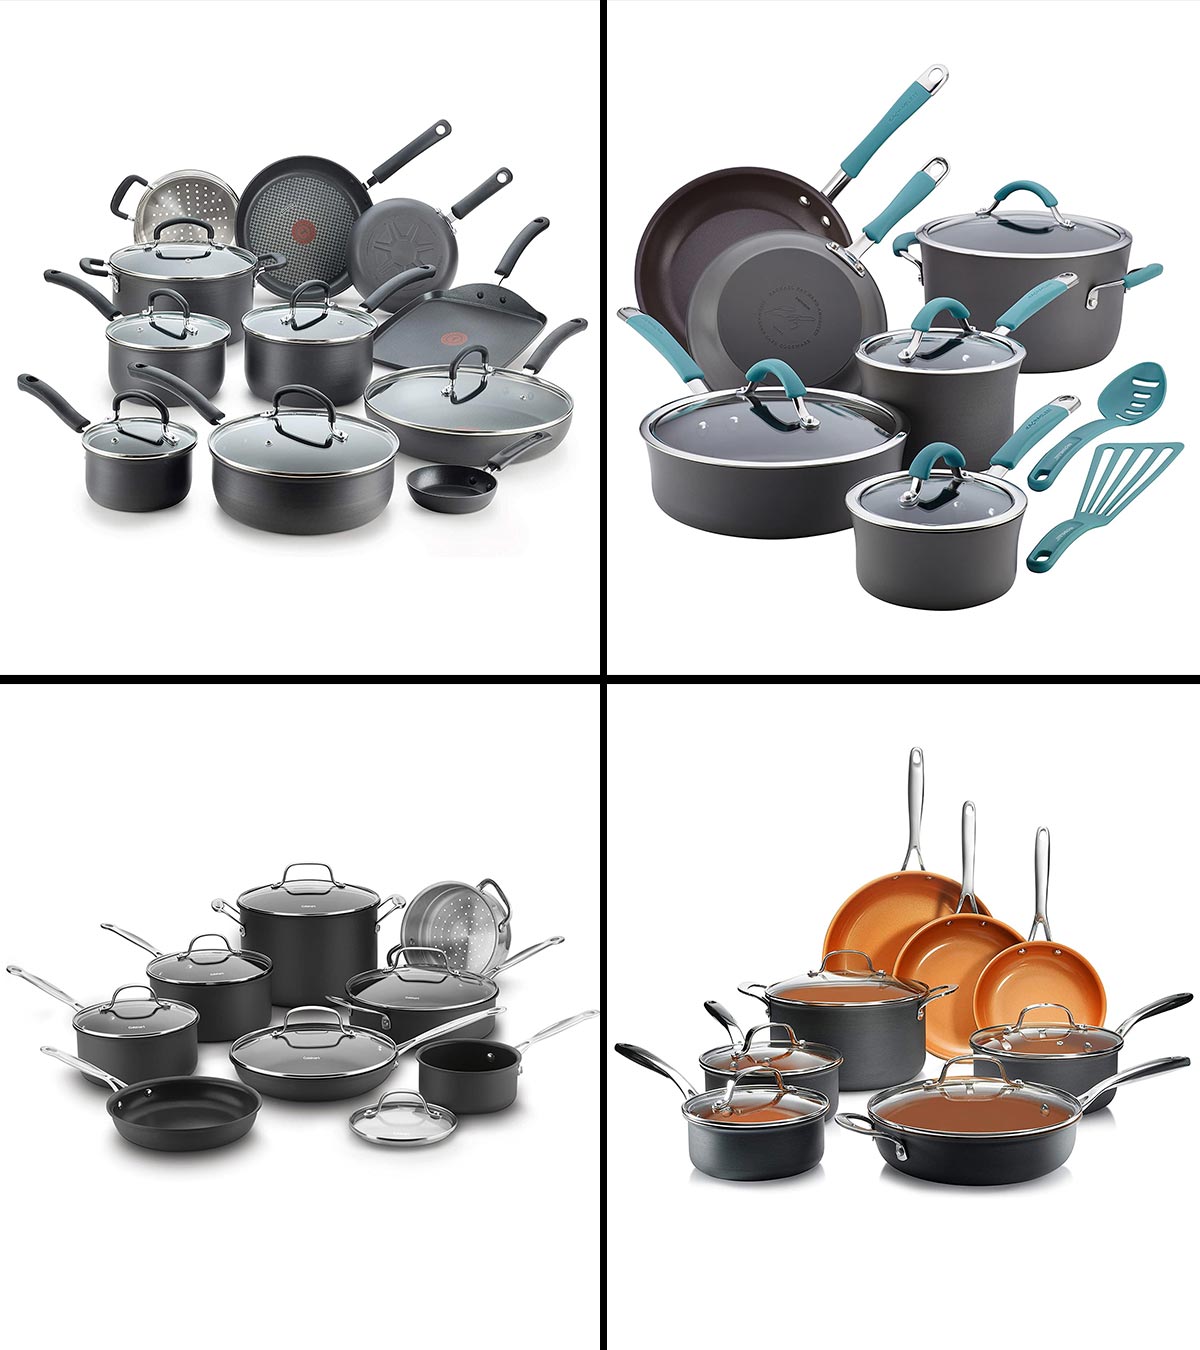 https://www.momjunction.com/wp-content/uploads/2021/07/15-Best-Hard-Anodized-Cookware-Sets-In-2021-Banner-MJ-Recovered.jpg